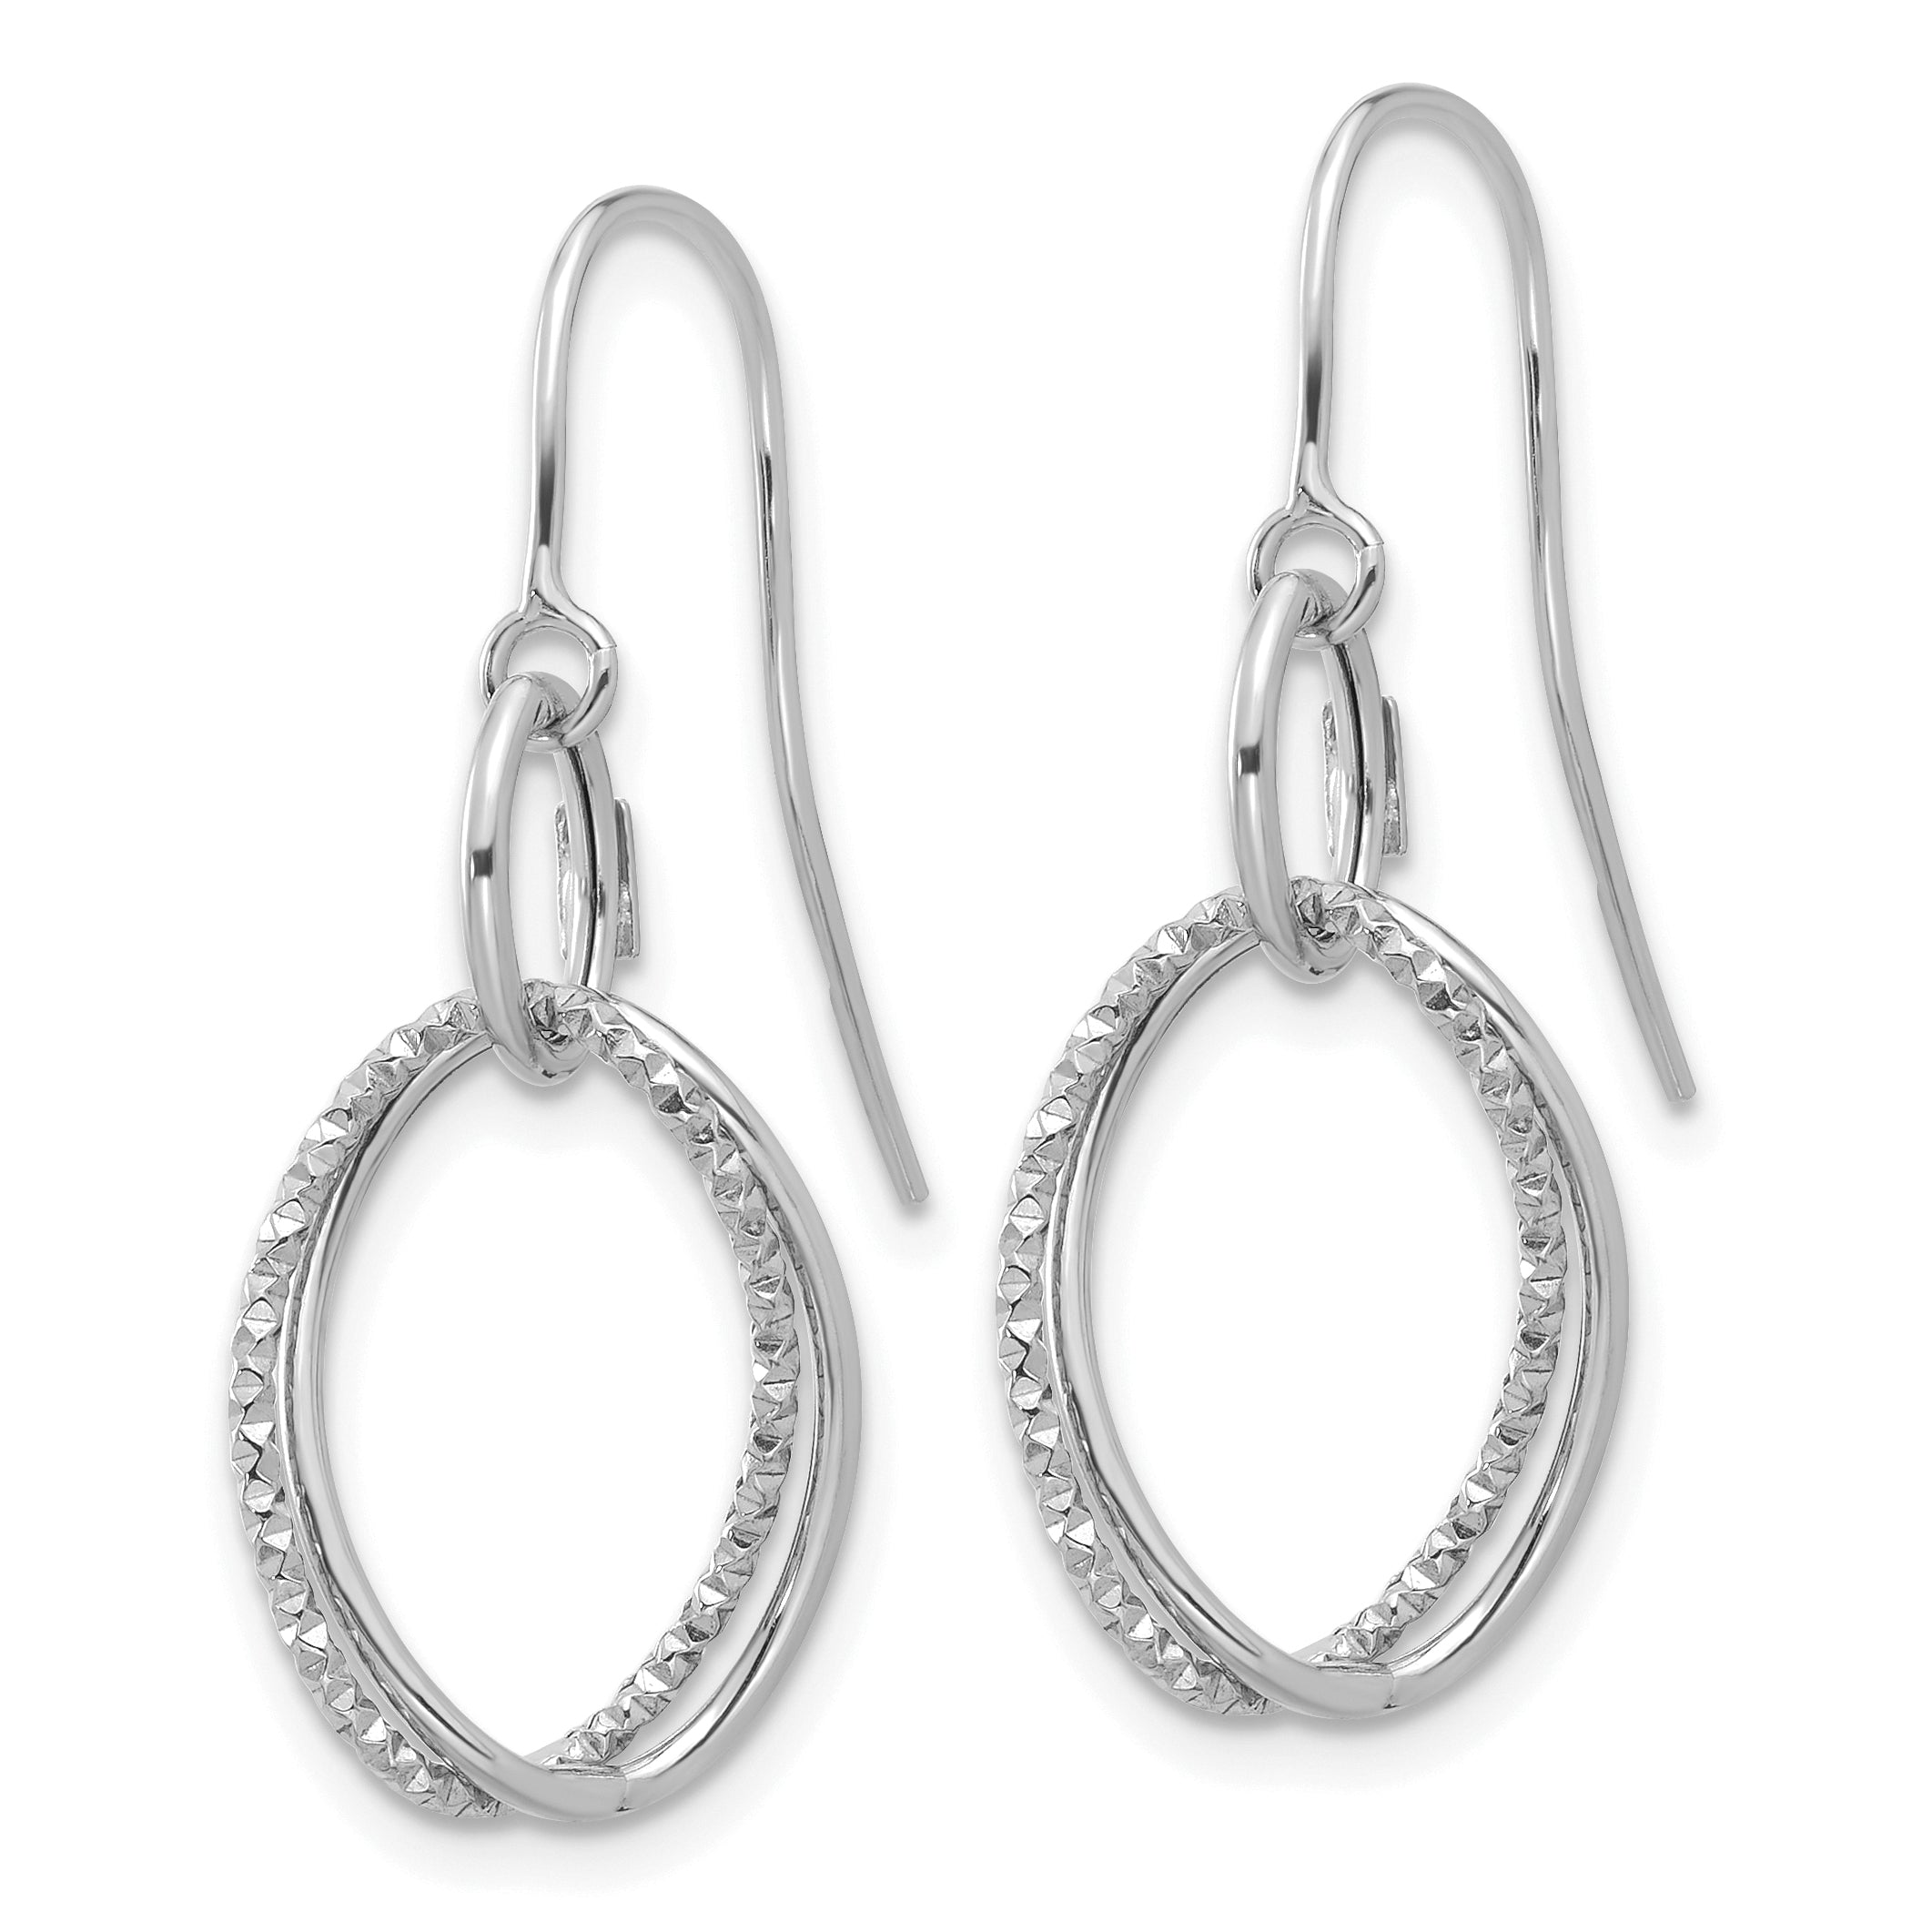 10K White Gold Polished and Textured Shepherd Hook Earrings